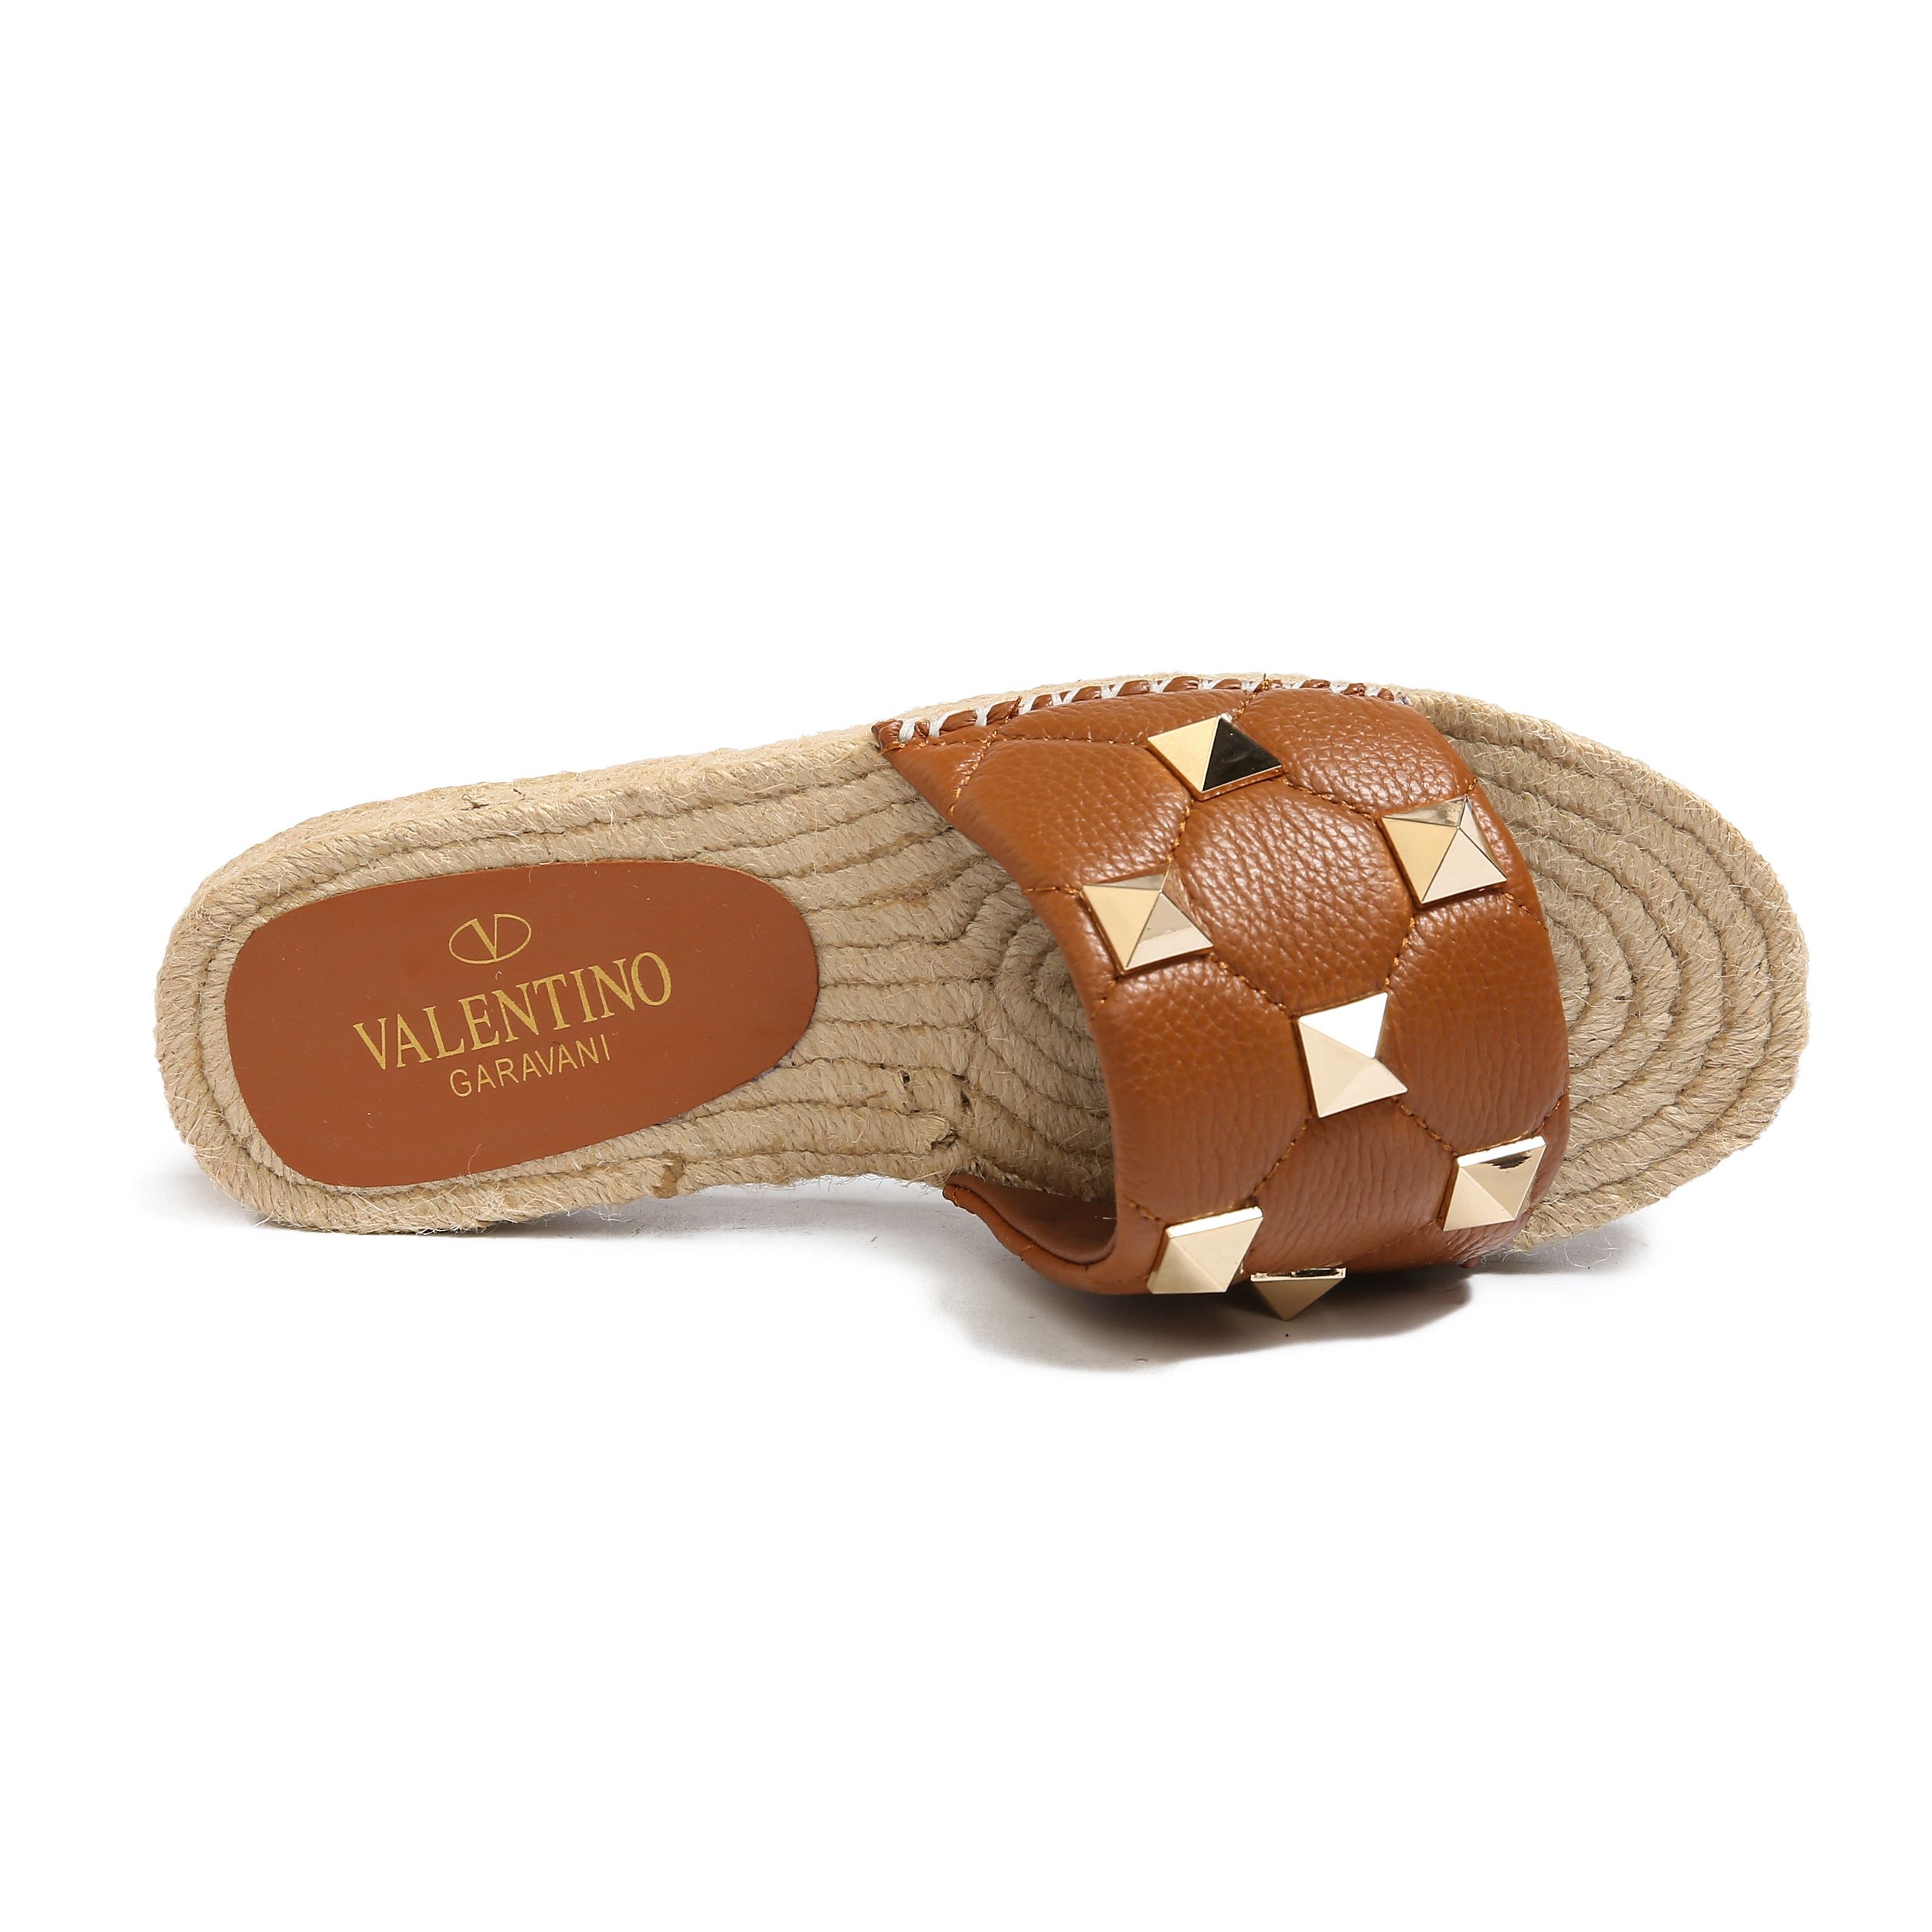 Ah Valentino (Valentino) new fisherman slippers, four colors available, sizes 35-43